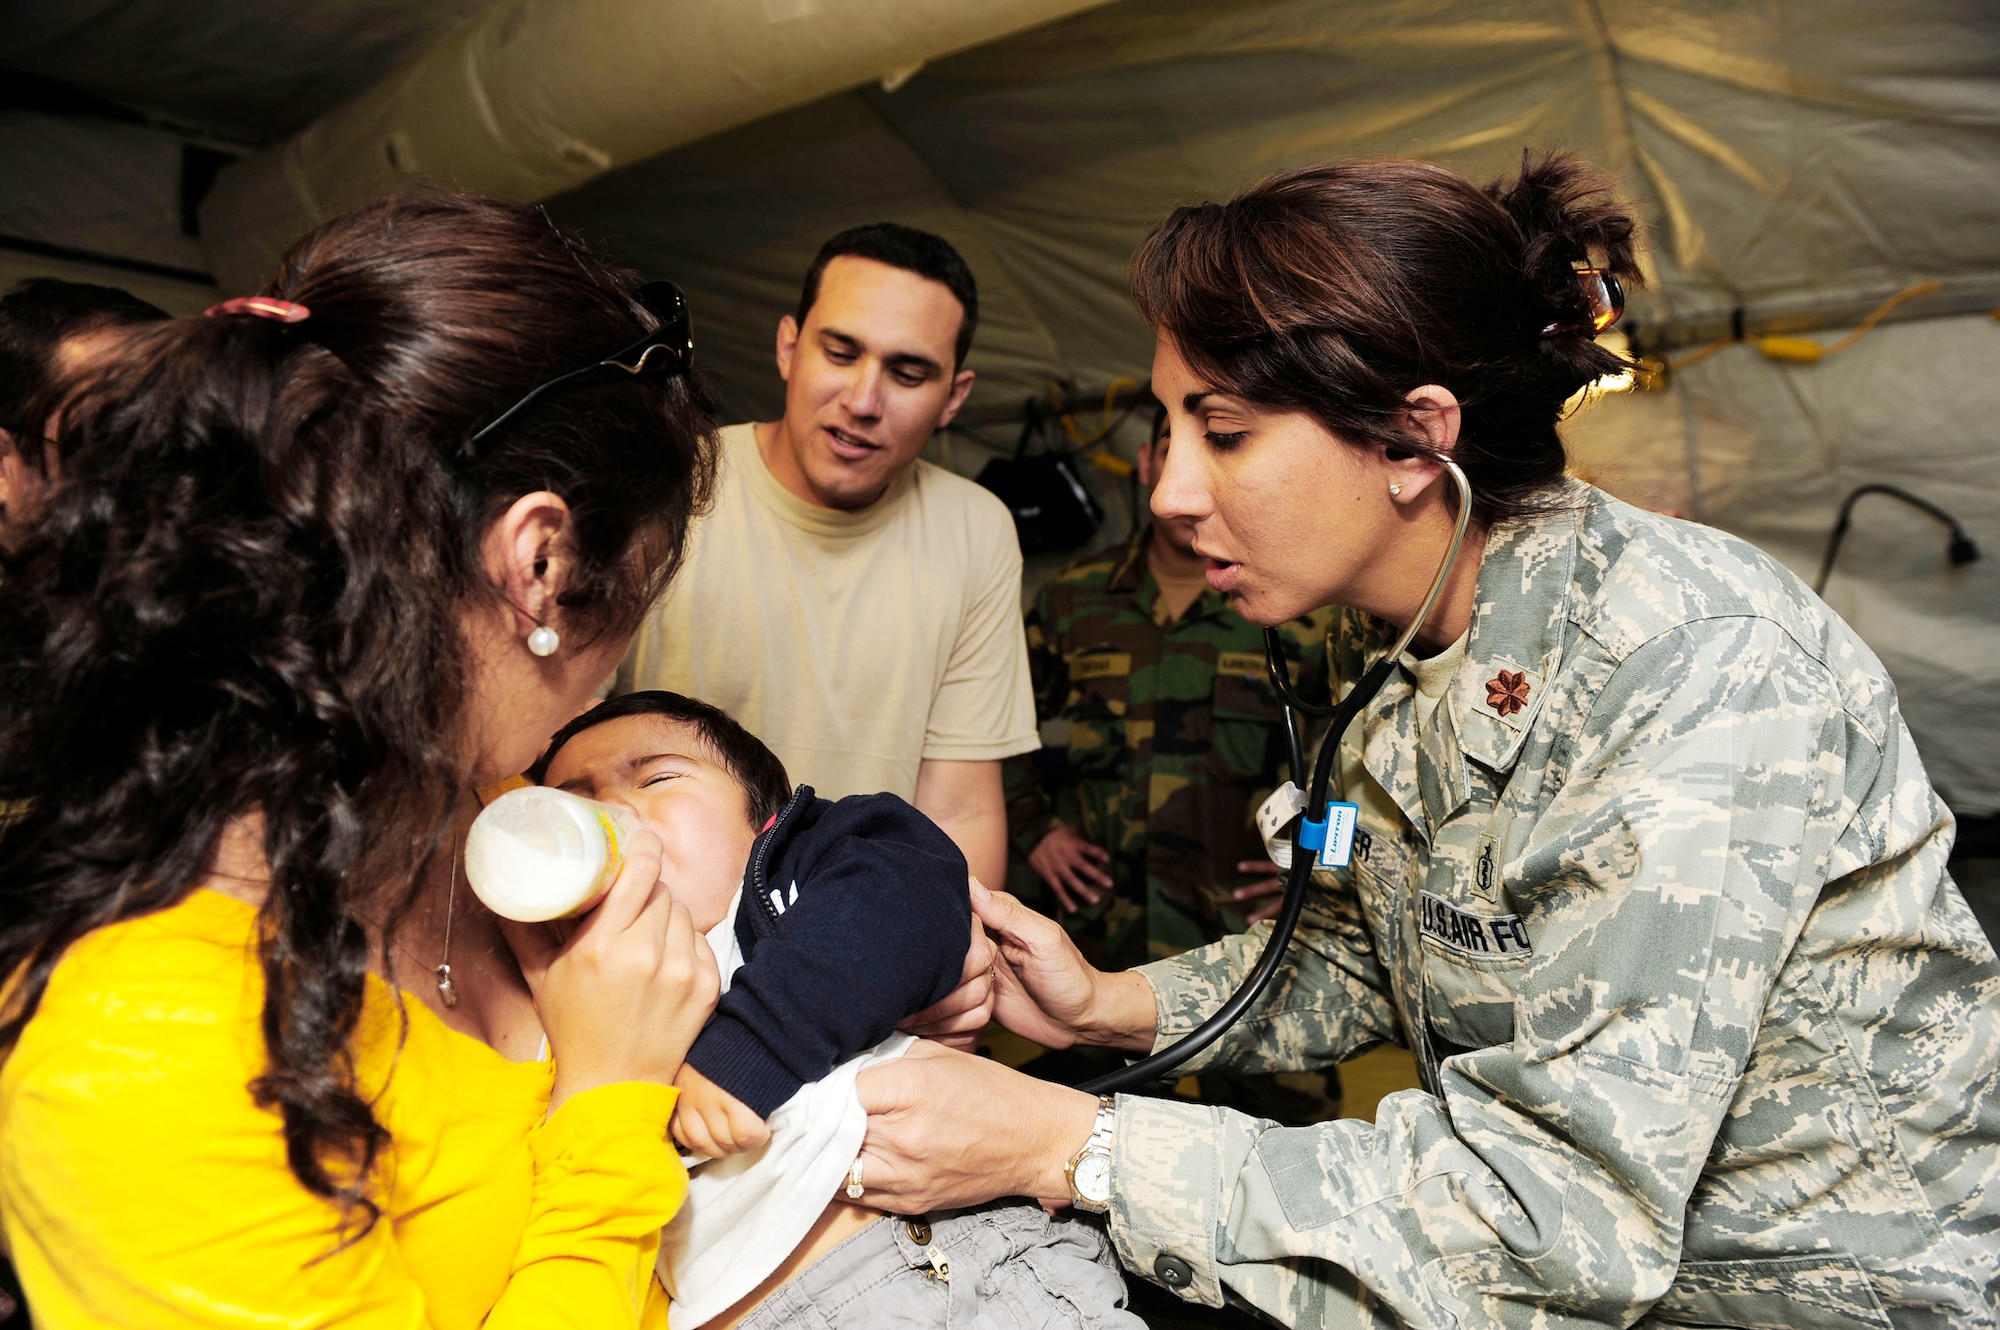 Maj. Deena Sutter checks the heartbeat of an ill child at an expeditionary hospital March 14, 2010, in Angol, Chile. Airmen from an Air Force Expeditionary Medical Support team along with members of the Chilean army built a mobile hospital here to help augment medical services for nearly 110,000 Chileans in the region. Major Sutter is assigned to the 59th Medical Wing, Wilford Hall Medical Center at Lackland Air Force Base, Texas. (U.S. Air Force photo/Senior Airman Tiffany Trojca)